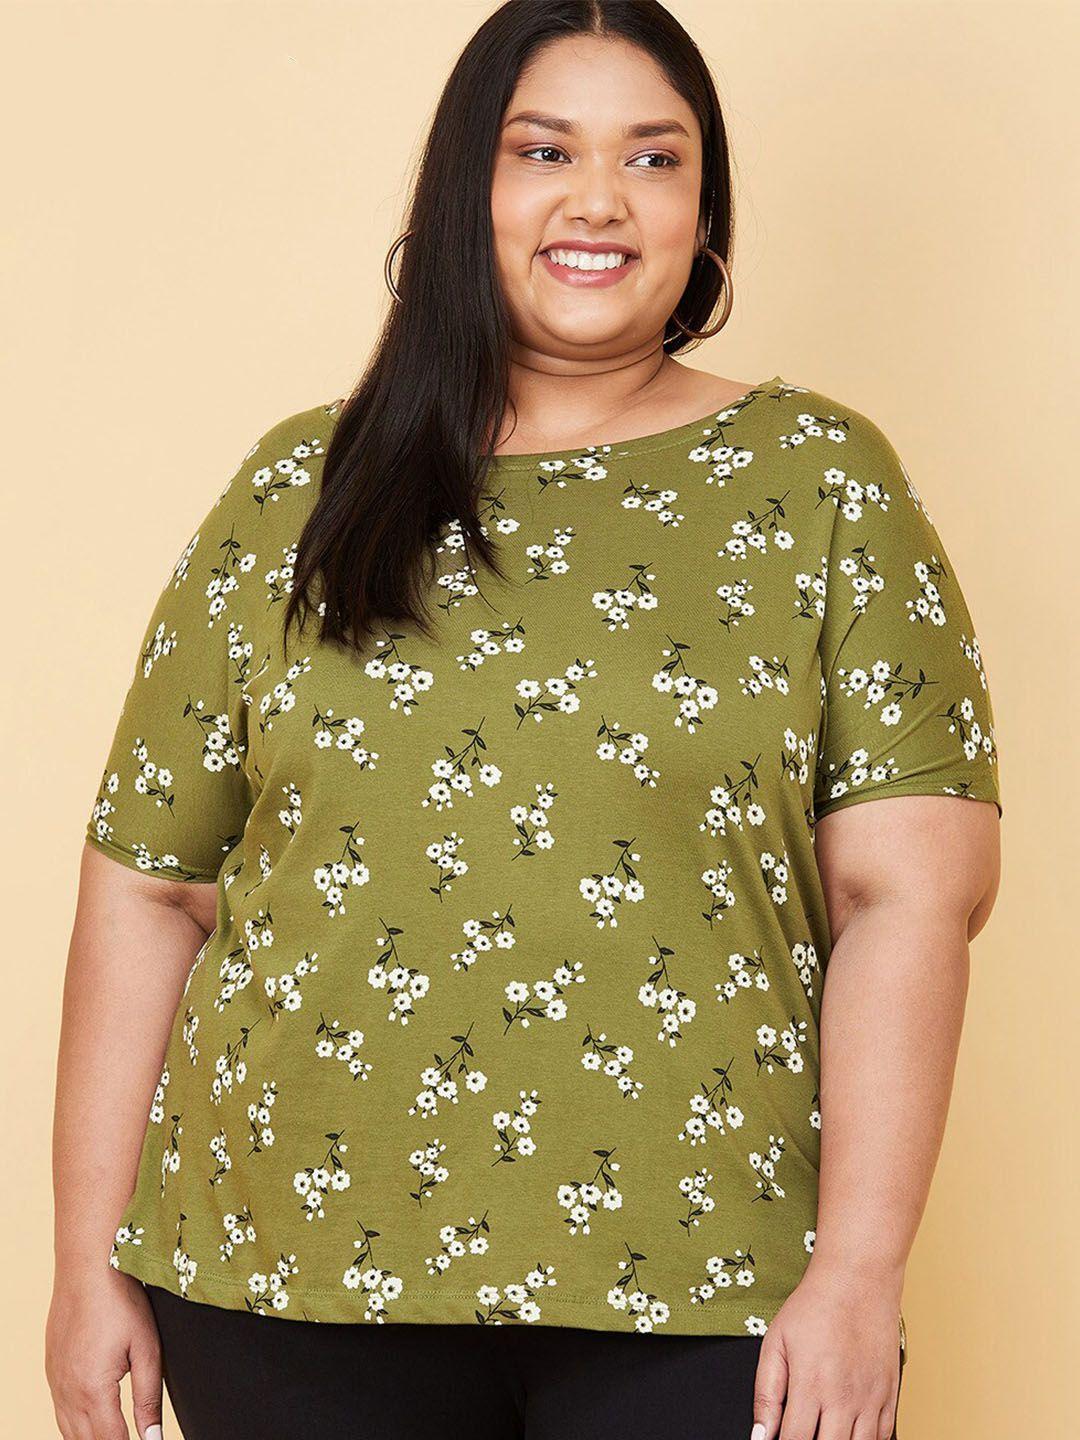 max women plus size olive green floral printed pure cotton t-shirt